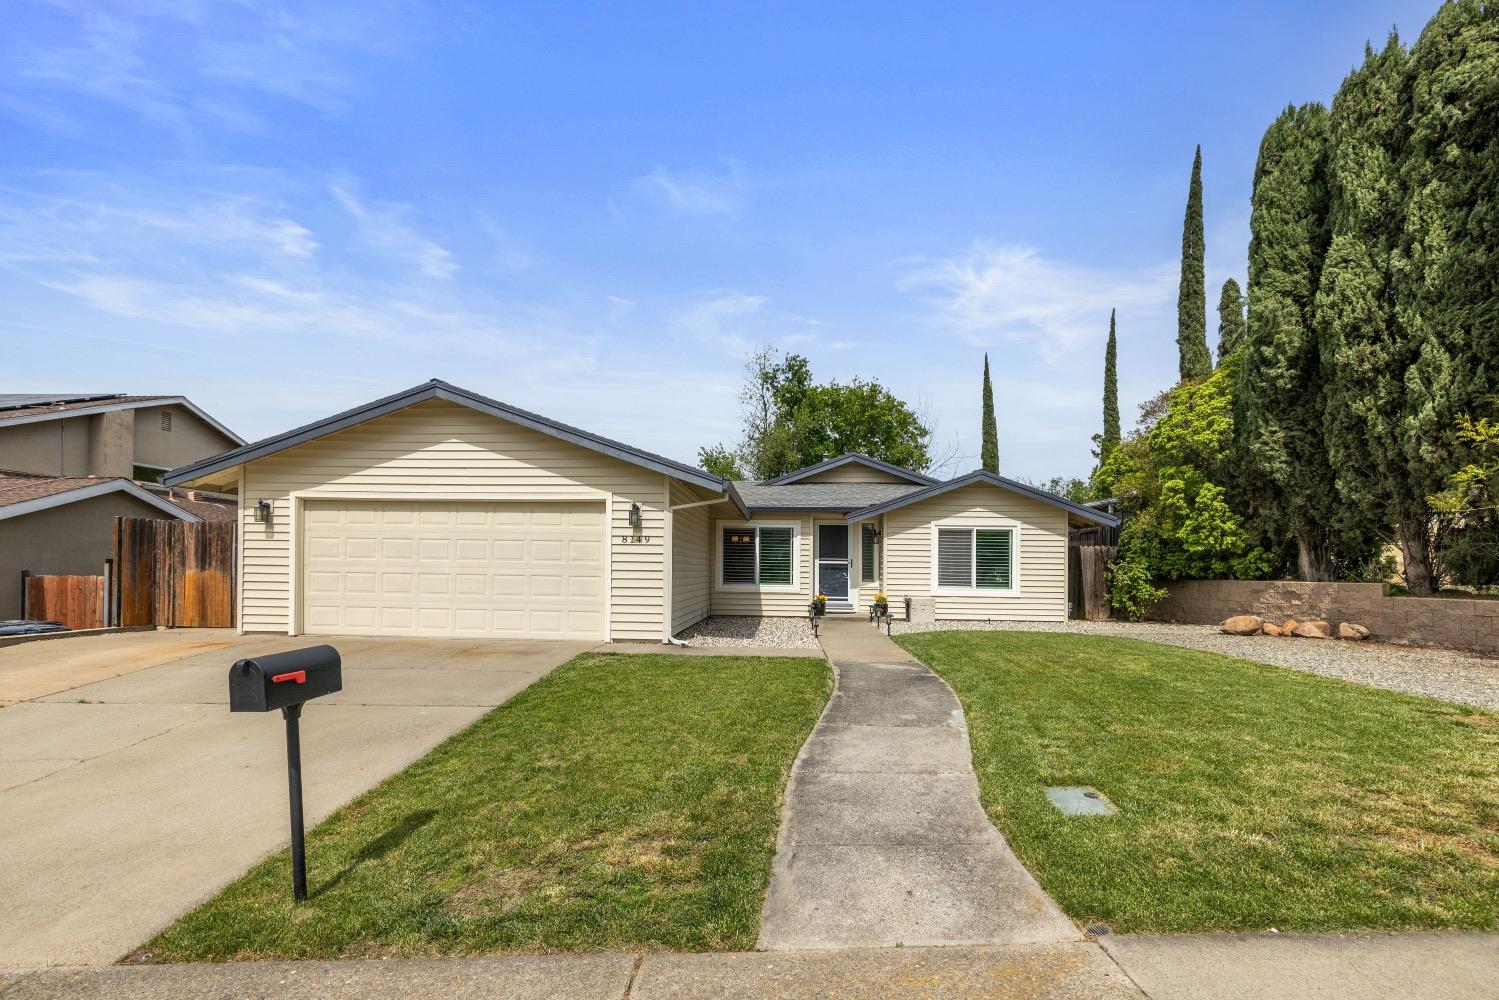 Photo of 8149 Mesa Oak Wy in Citrus Heights, CA